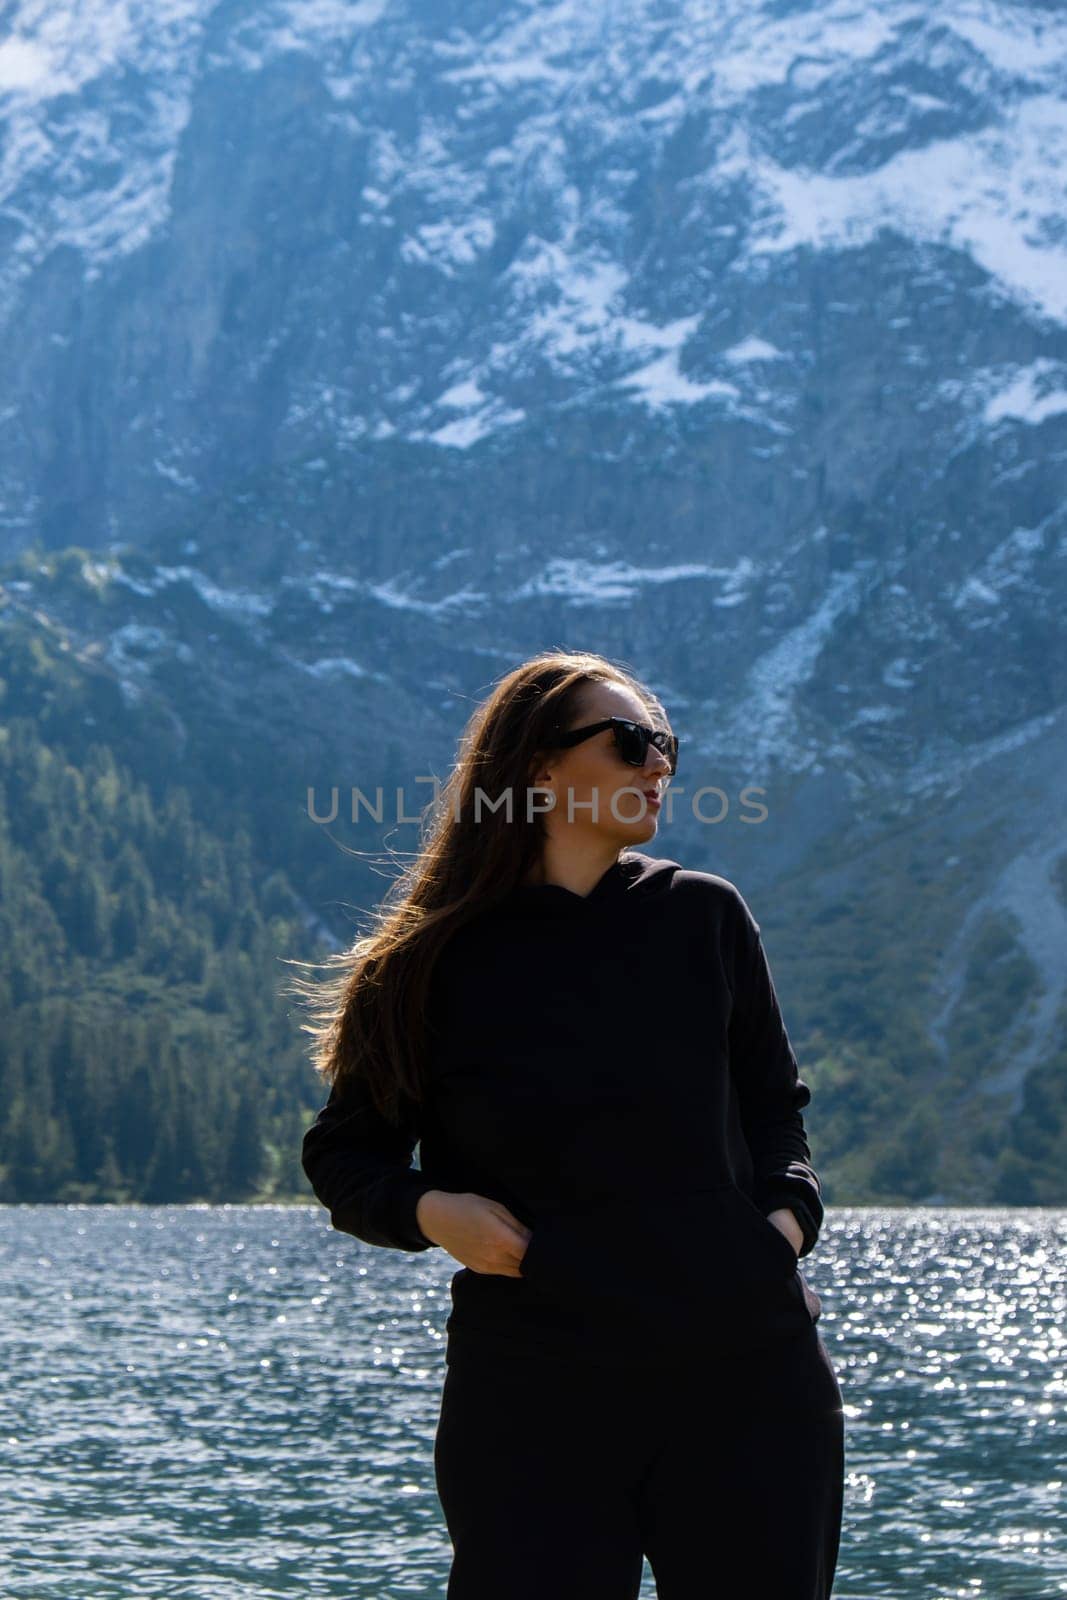 Young woman enjoying nature in Morskie Oko Snowy Mountain Hut in Polish Tatry mountains Zakopane Poland. Naturecore aesthetic beautiful green hills. Mental and physical wellbeing Travel outdoors tourist destination